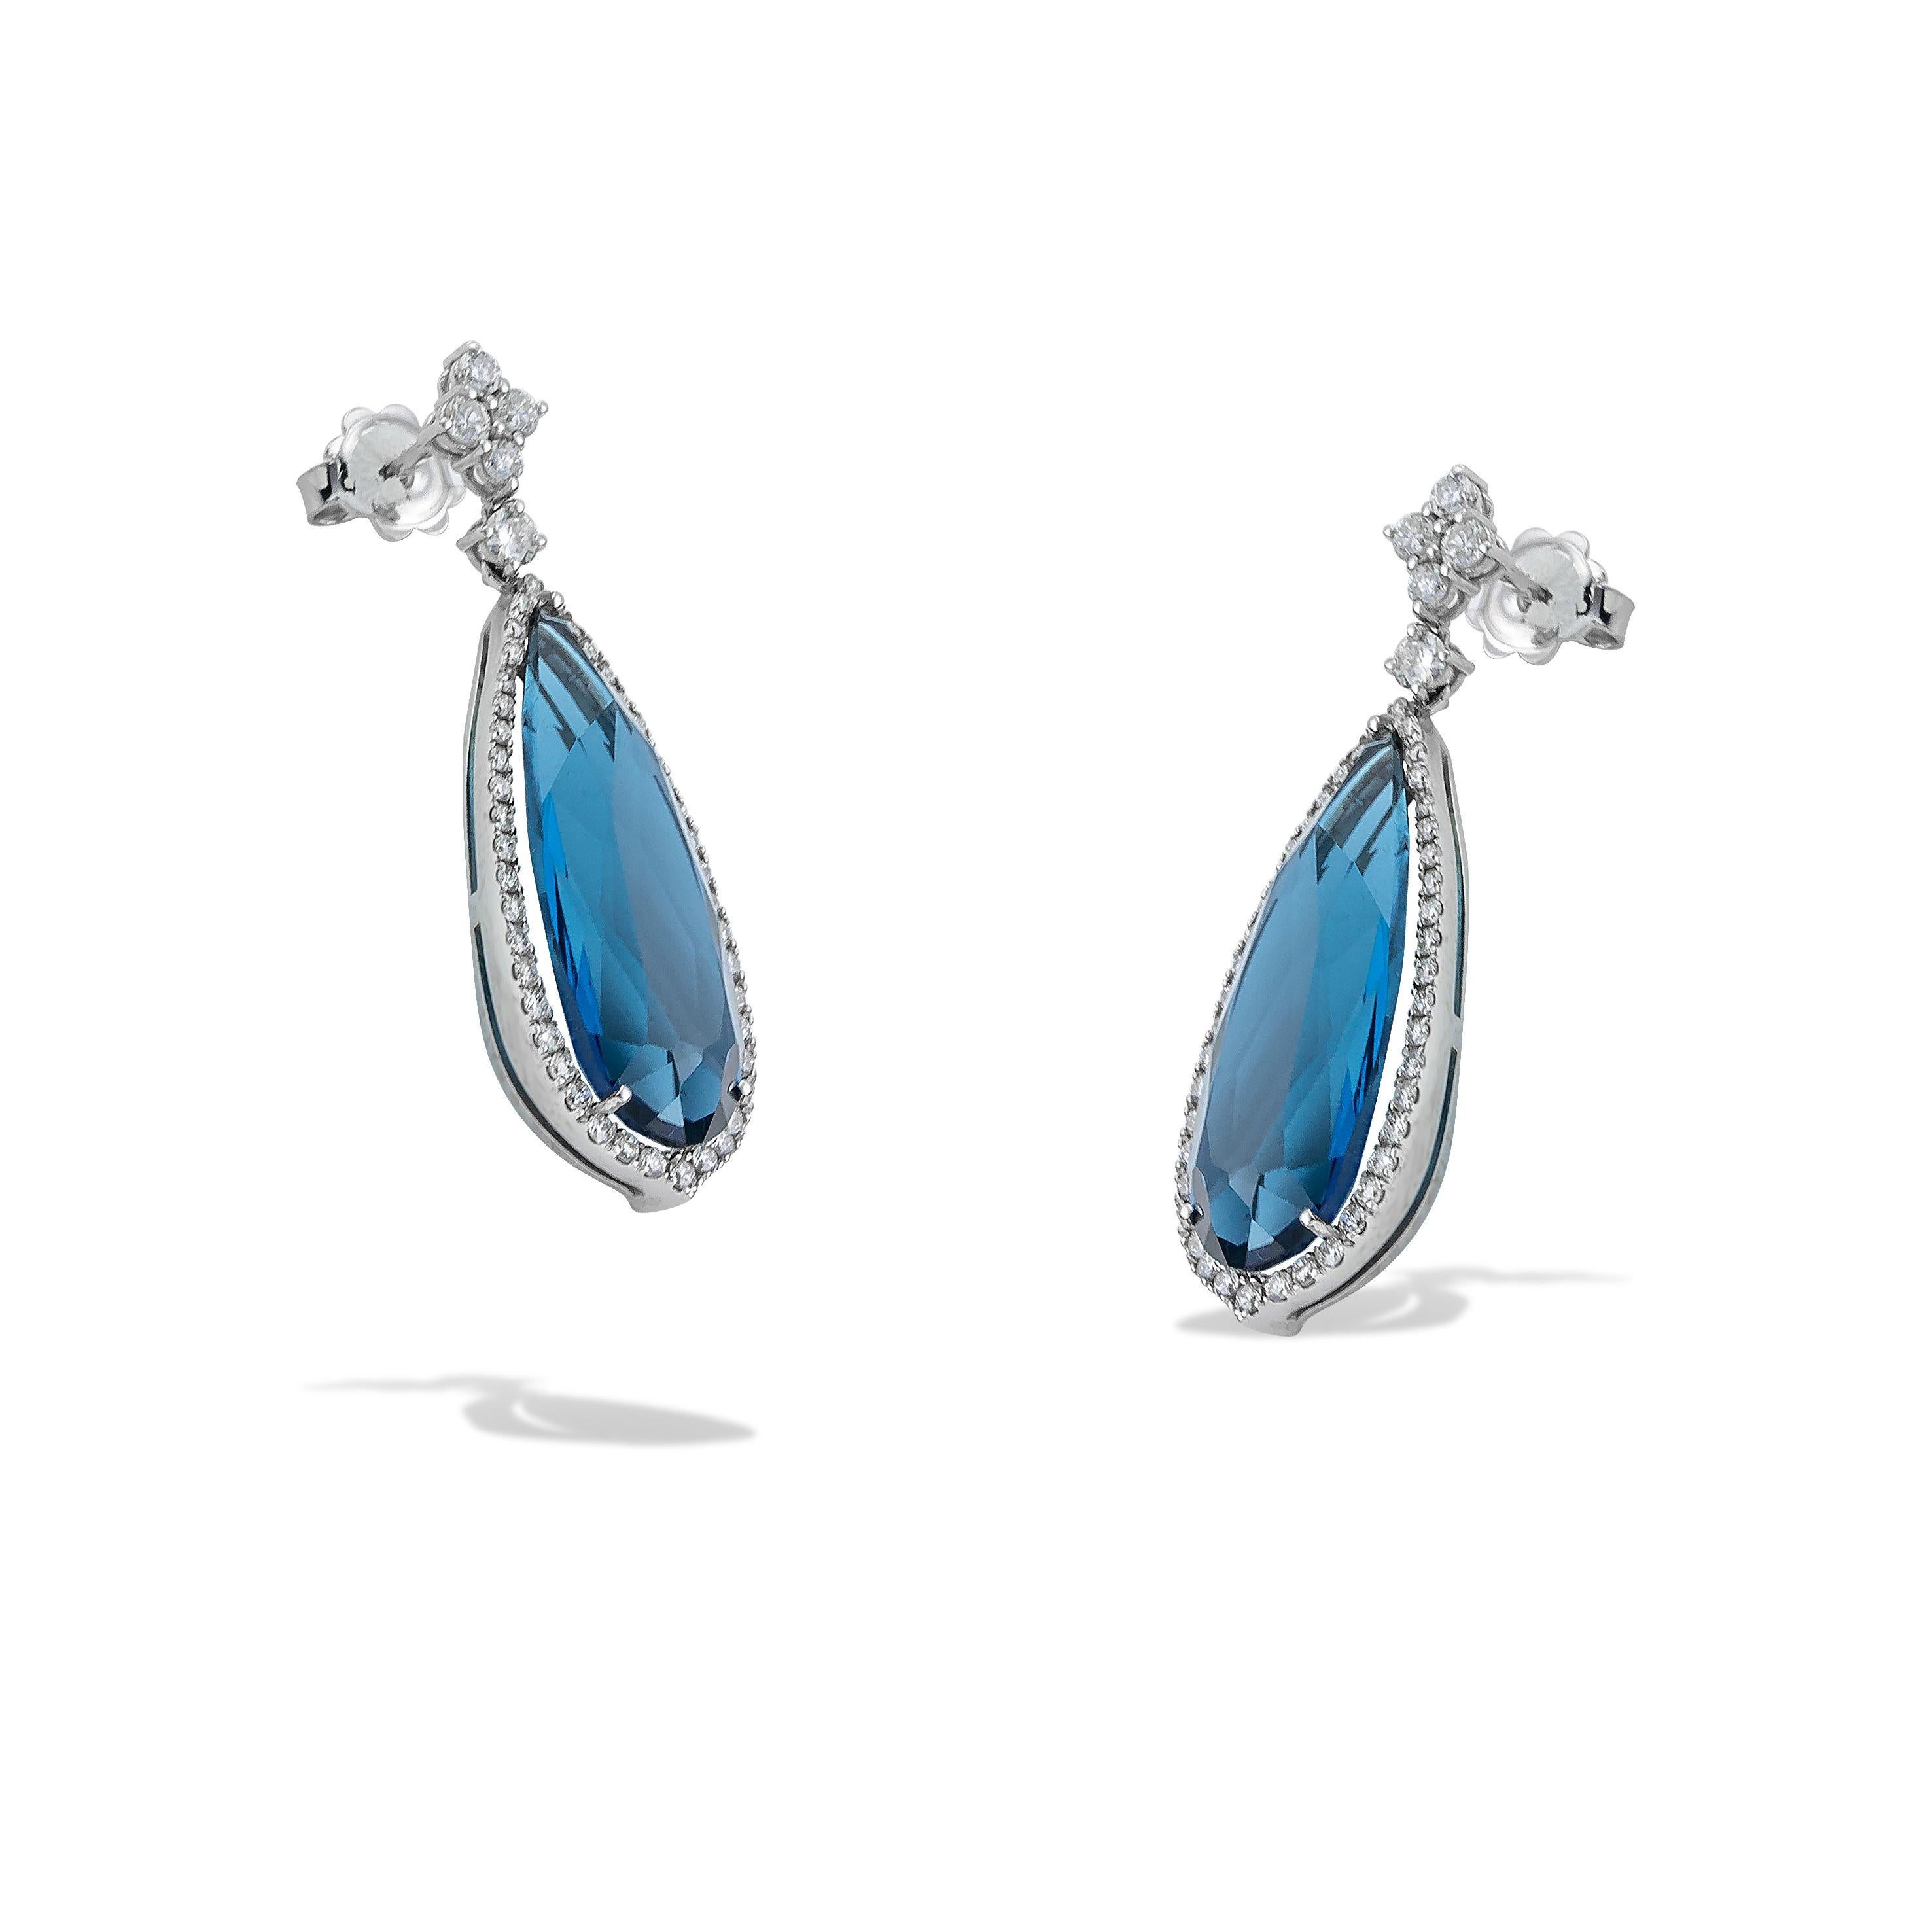 Unique long dangle earrings, Pear shape, with London Blue Topaz and white brilliant cut diamonds handcrafted in 18Kt white gold. The big and rare London Blue Topaz adds colour in your outfit while the brilliant diamonds around it play with the light